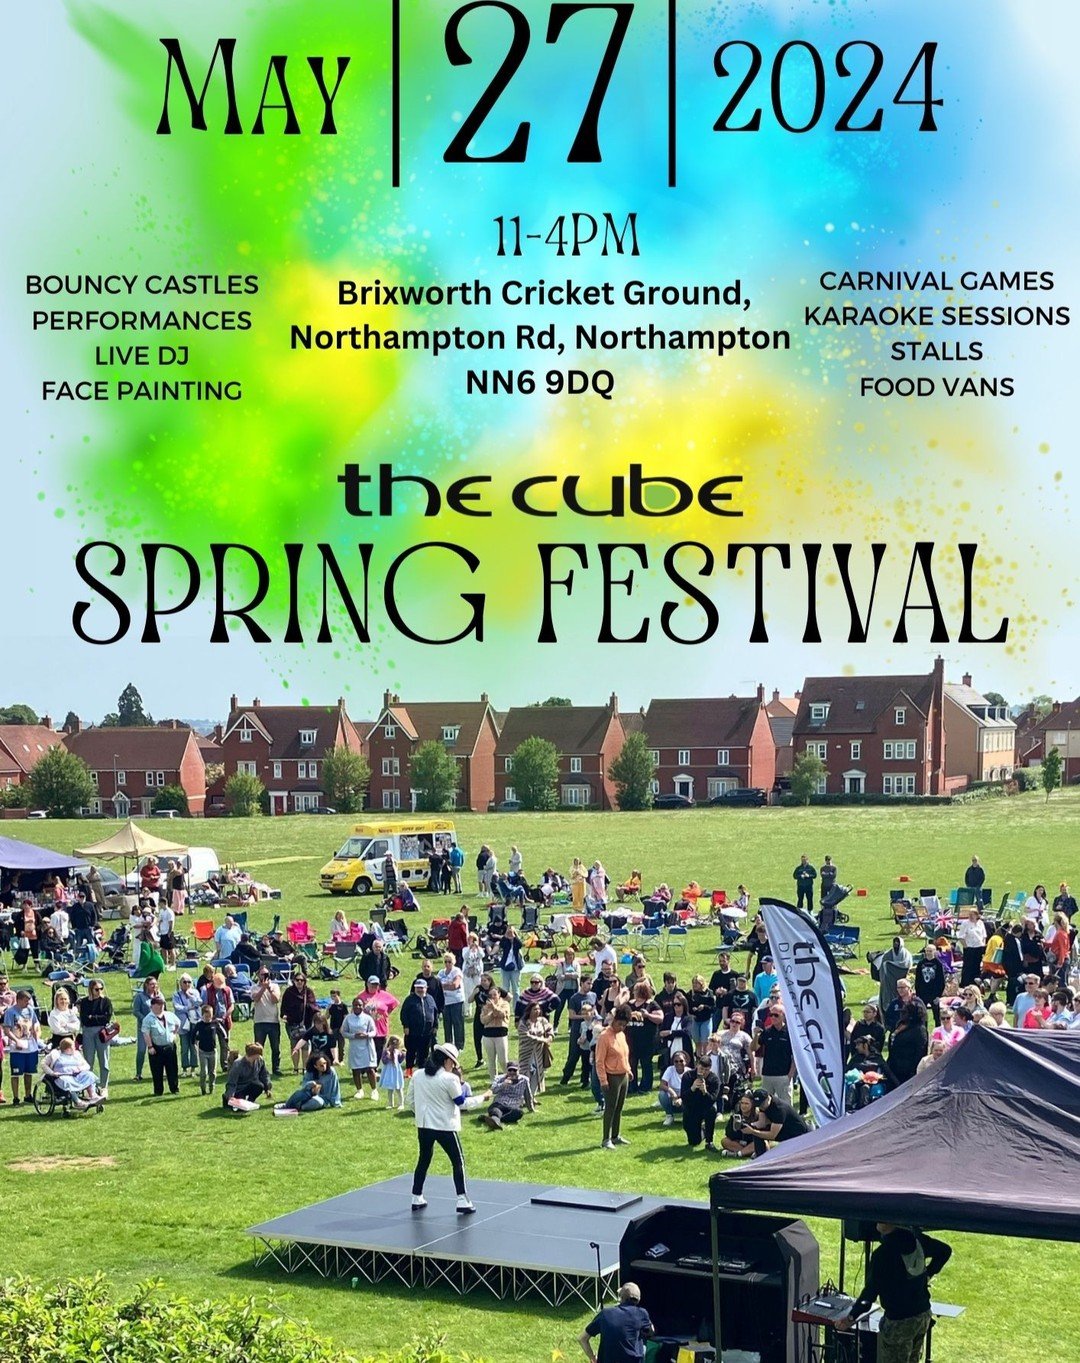 🎉 We cannot wait for Monday, 27th May, for our Cube Spring Festival at @brixworth_cc ! Not long now. Come down and bring your family! 🎶

We've got a full programme of acts on the main stage (which will be announced next week), loads of stalls, and 